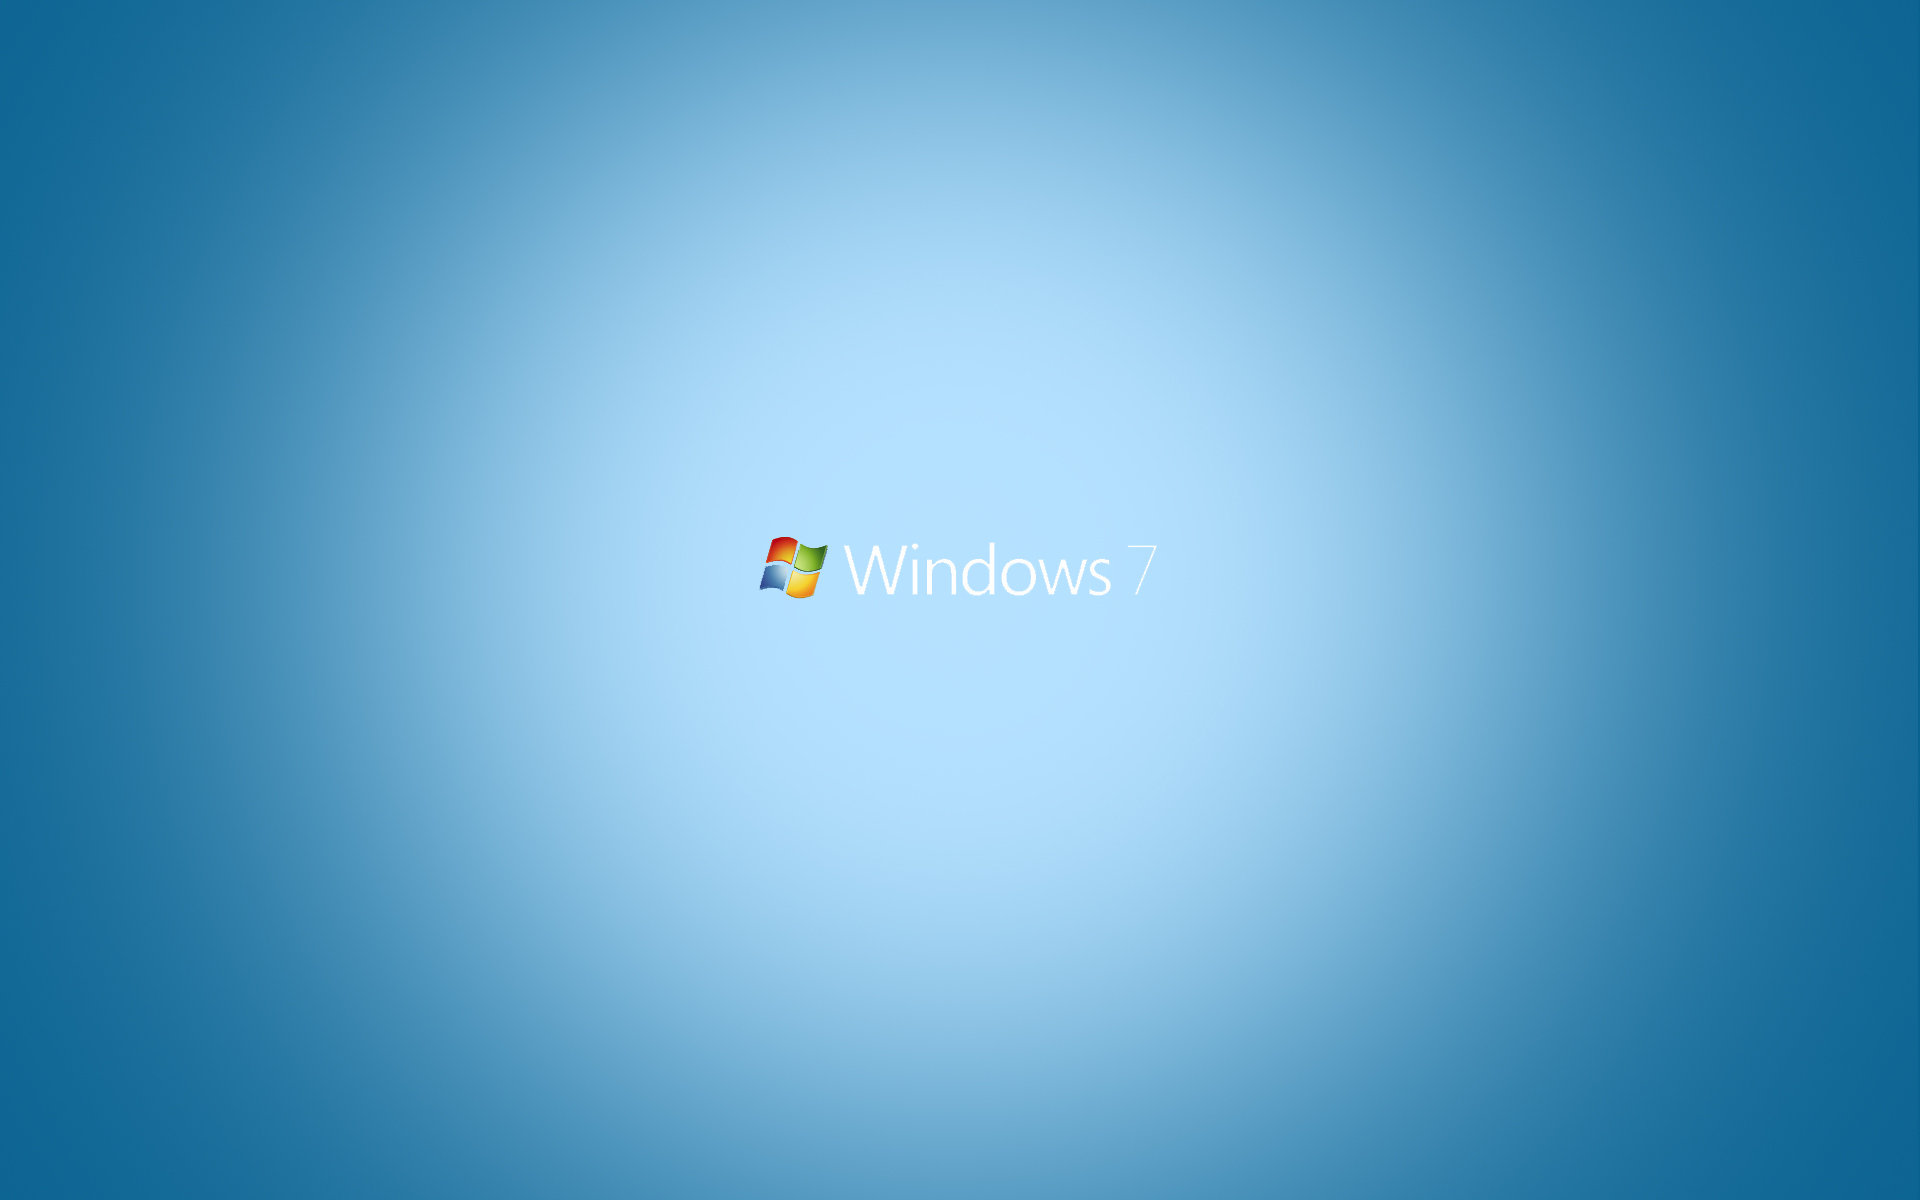 See the rest of my collection of Windows 7 Wallpapers here: Windows 7 